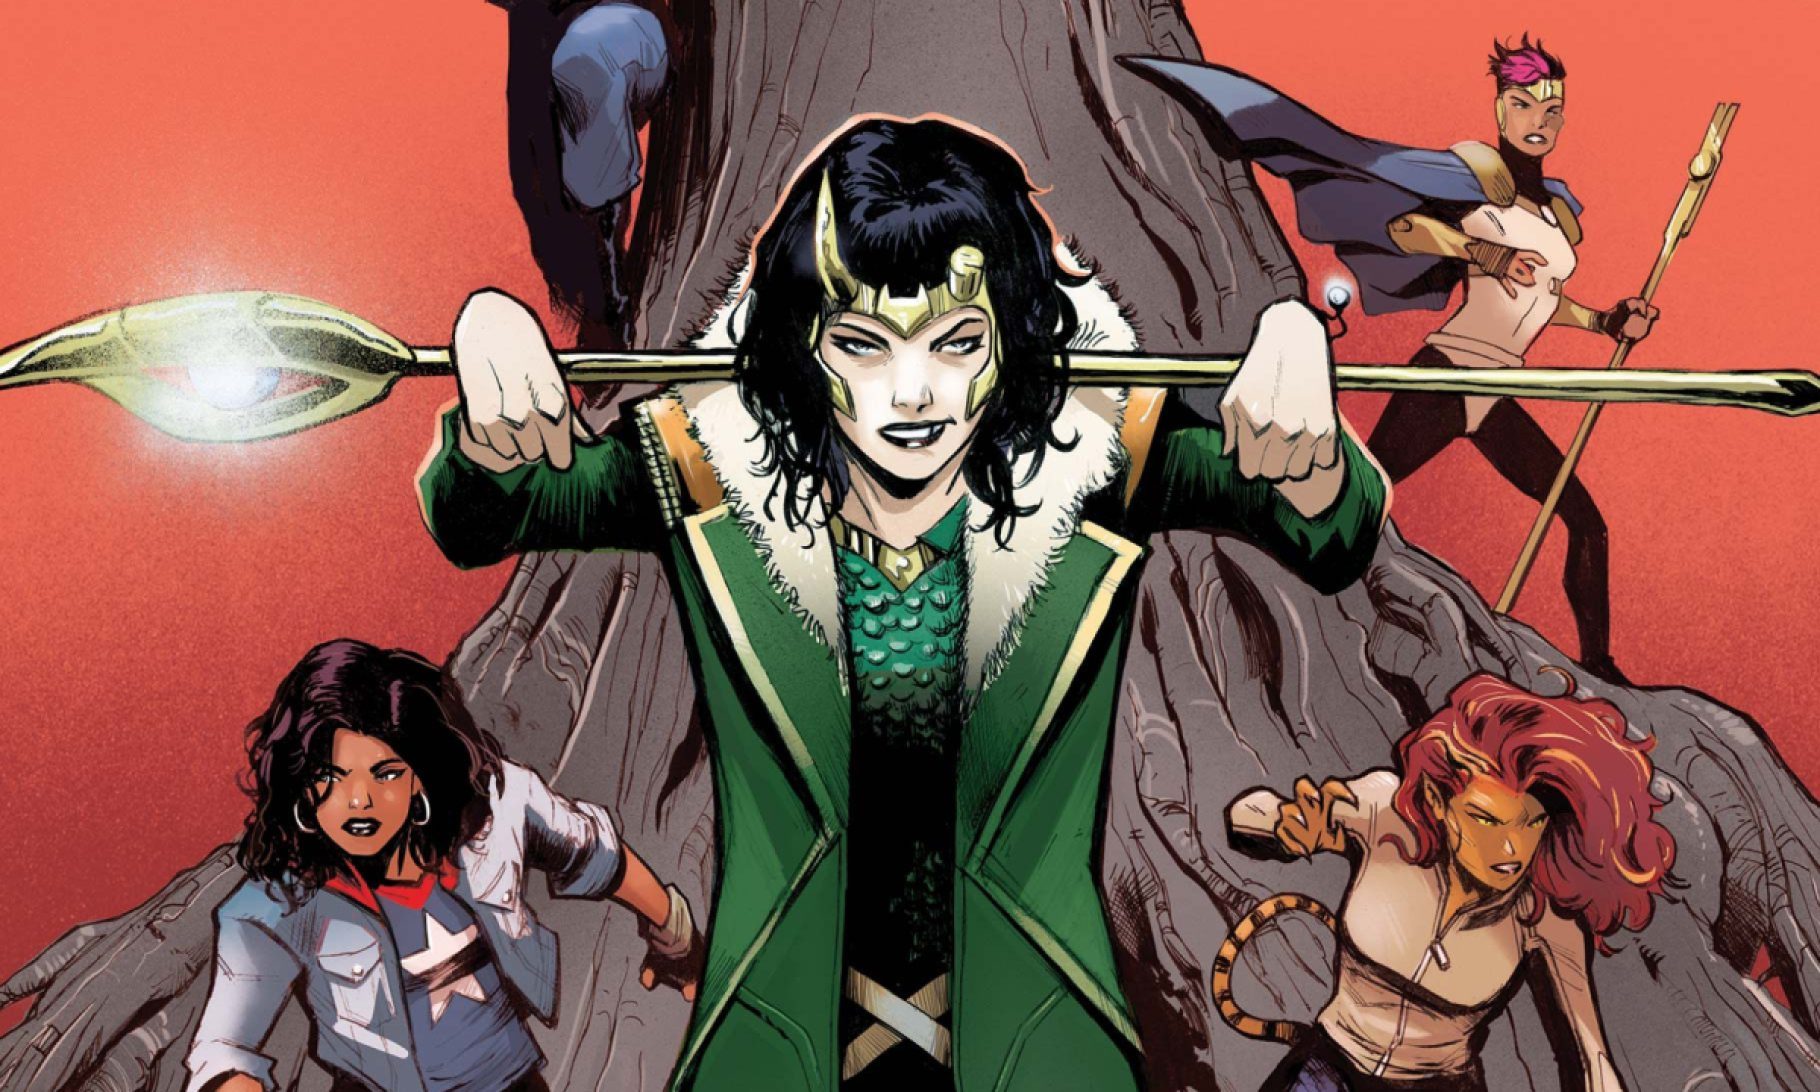 Cover of Defenders Beyond 1. Loki grins in the foreground, with Taaia, America Chavez, and Tigra behind her.